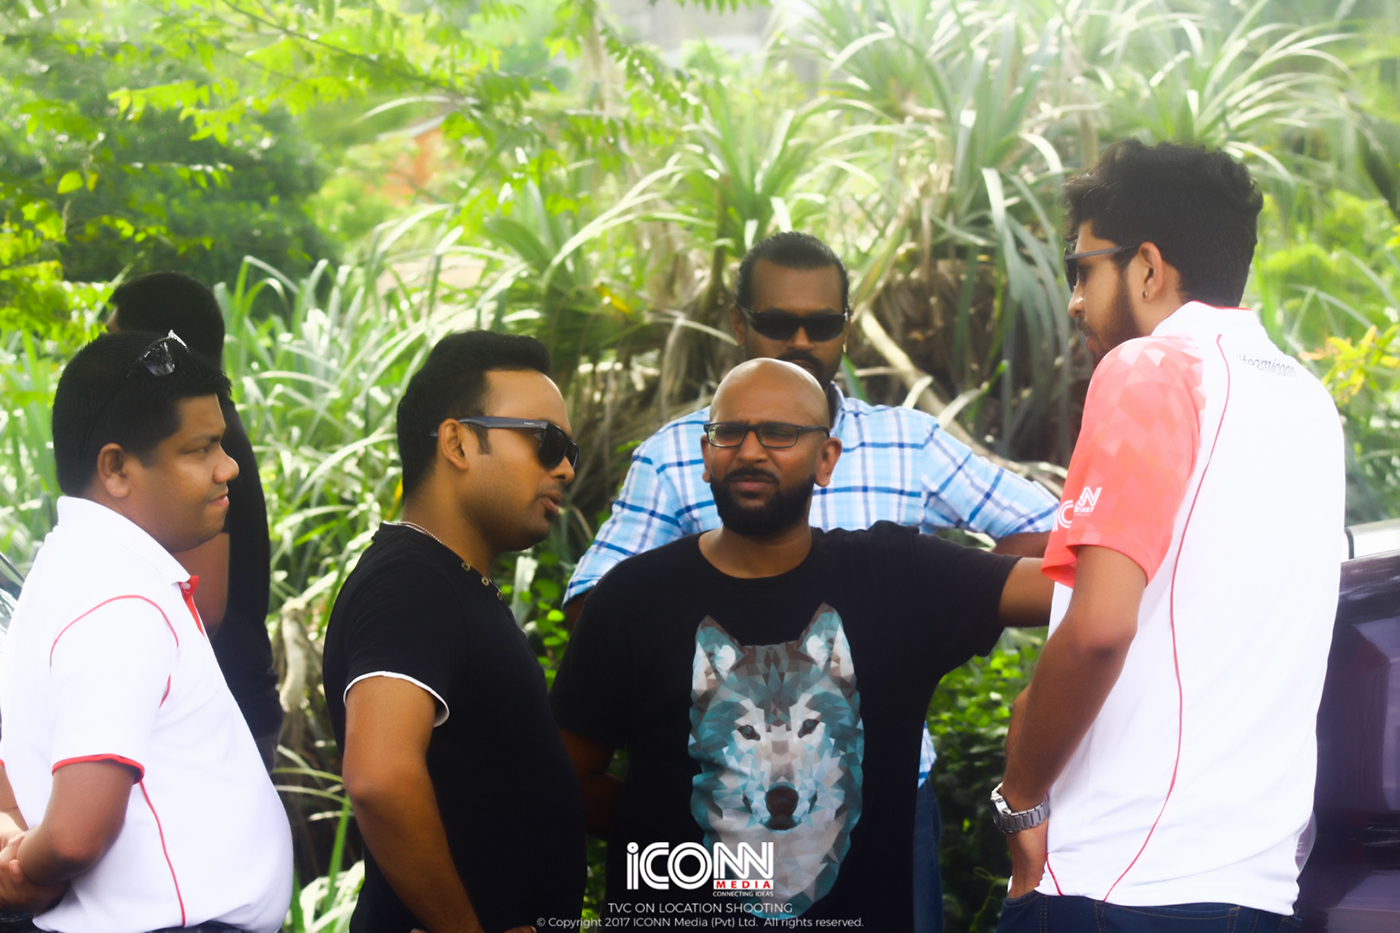 iconnmedia teamiconn iconn.lk tvc Advertising  lbfinanace leasing cinematography campaign agency